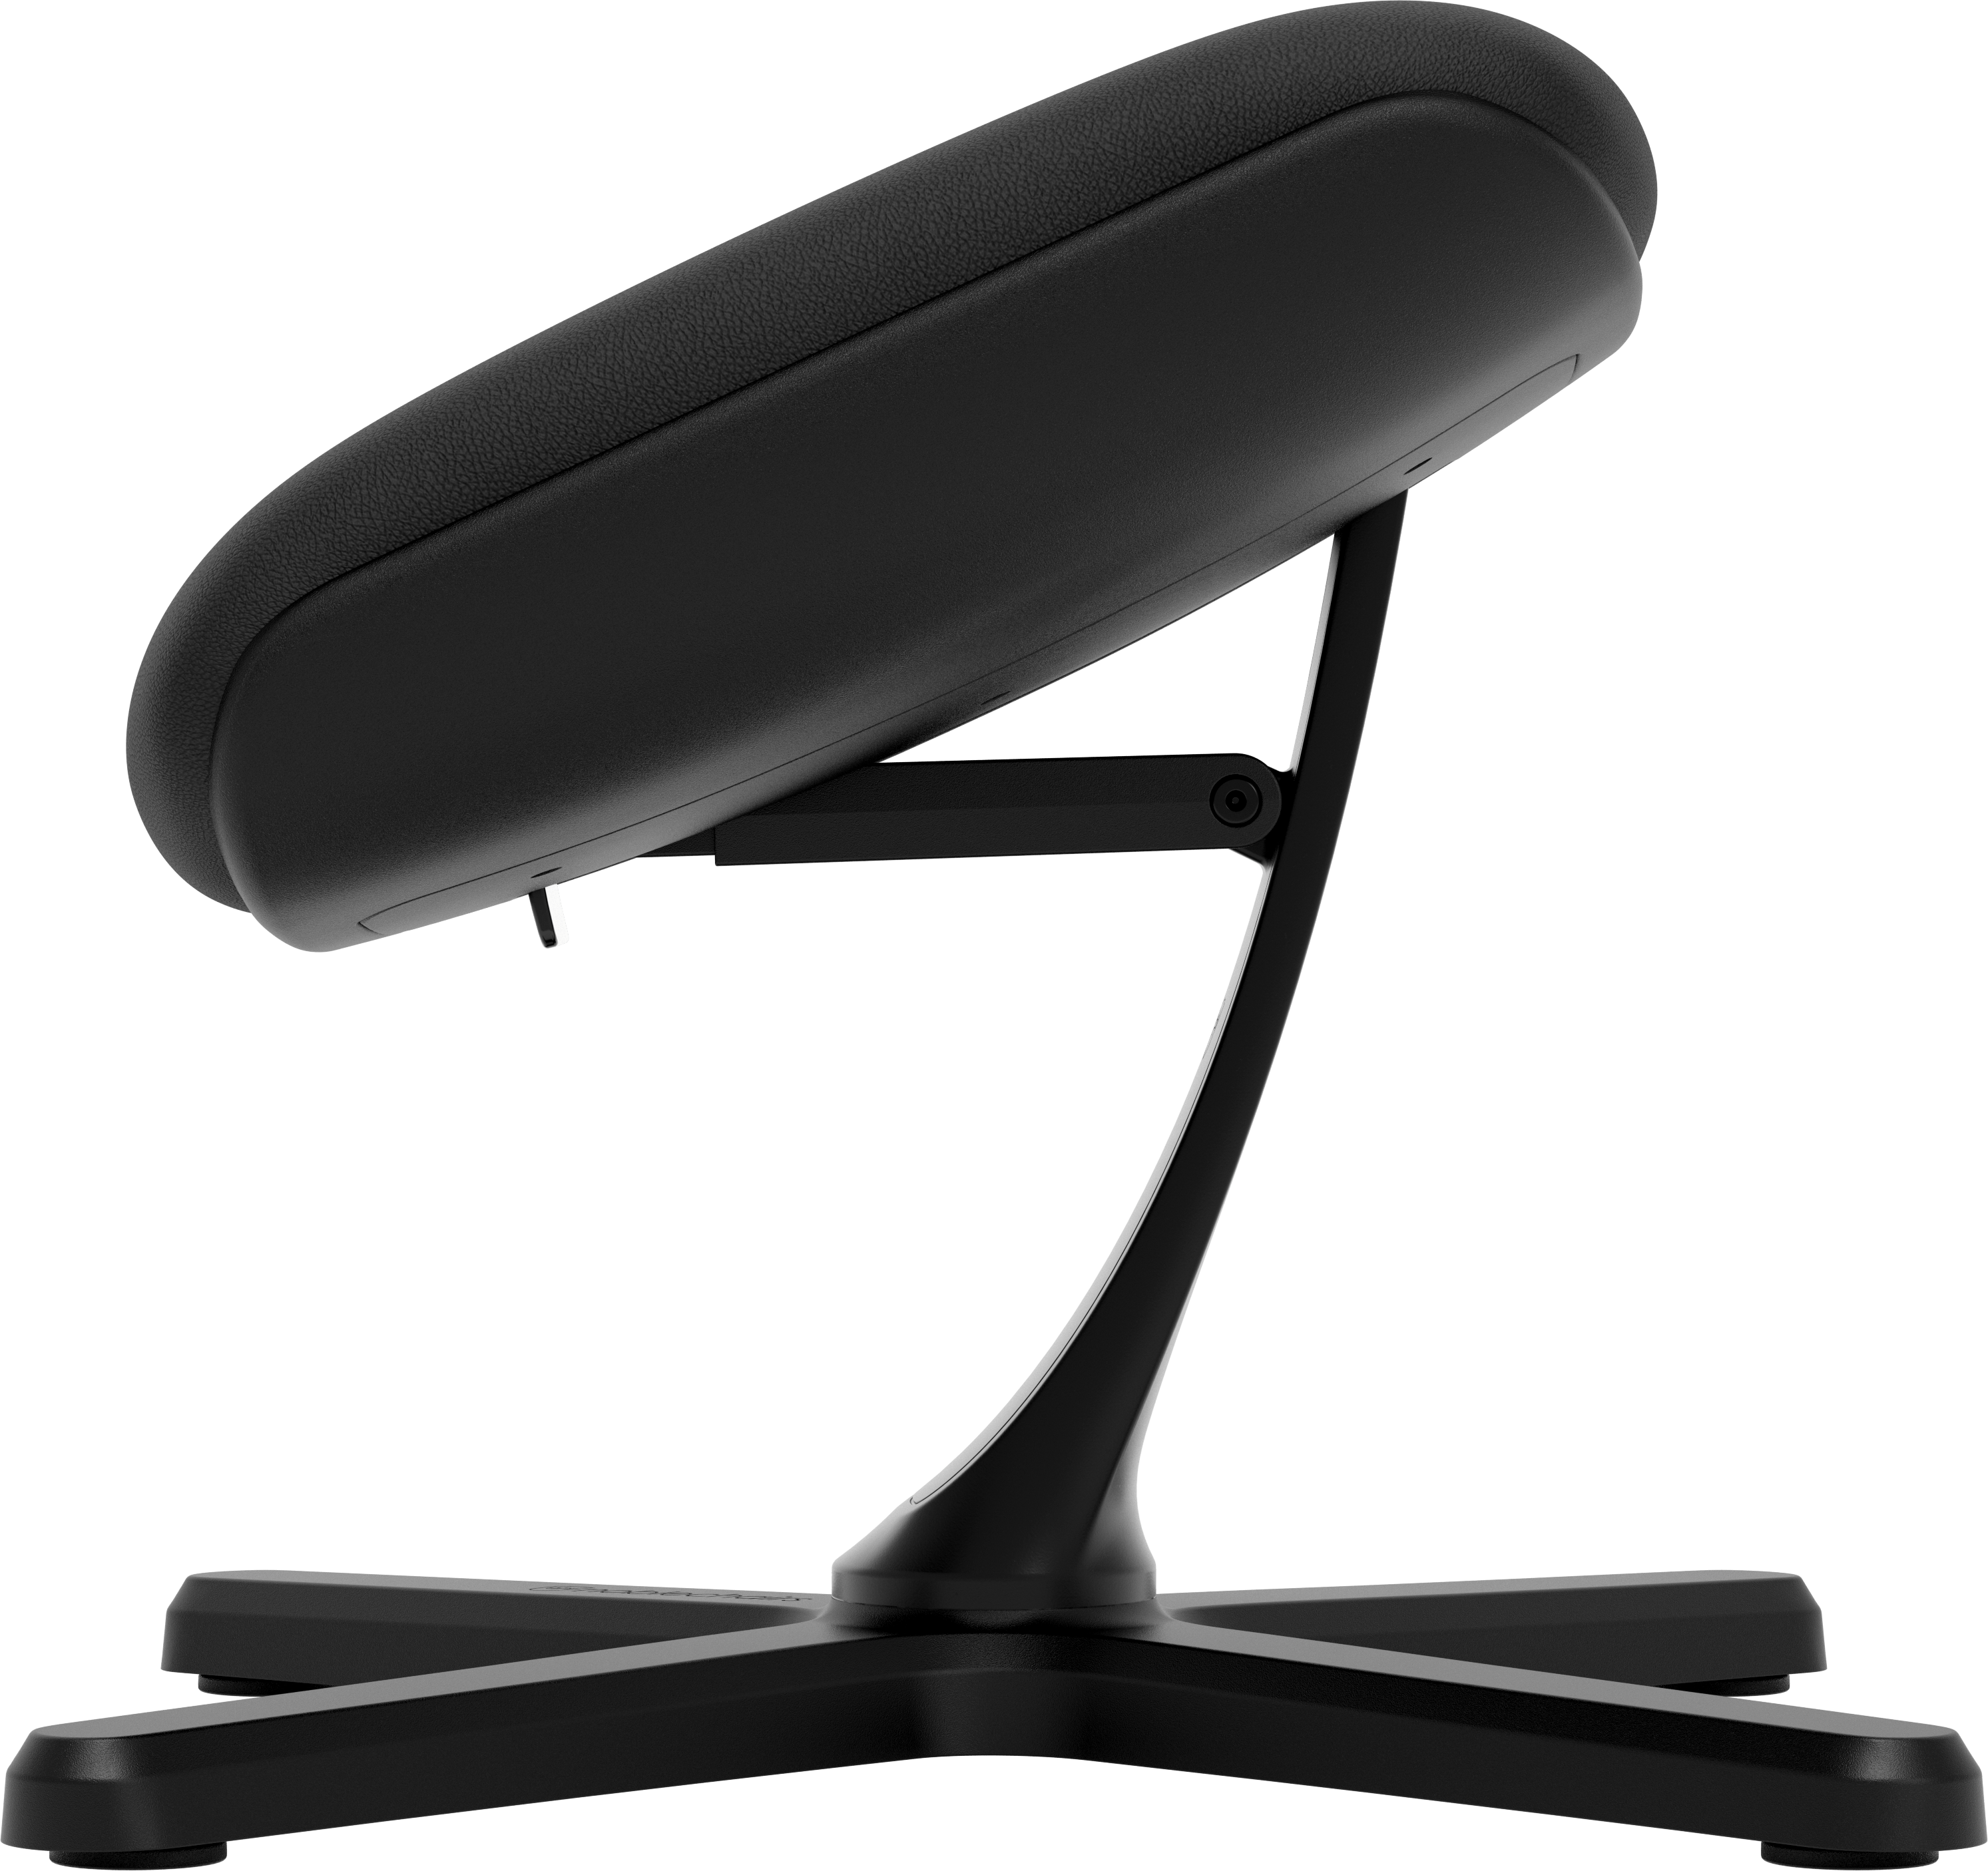 noblechairs Footrest 2 - Black Edition adjustable features